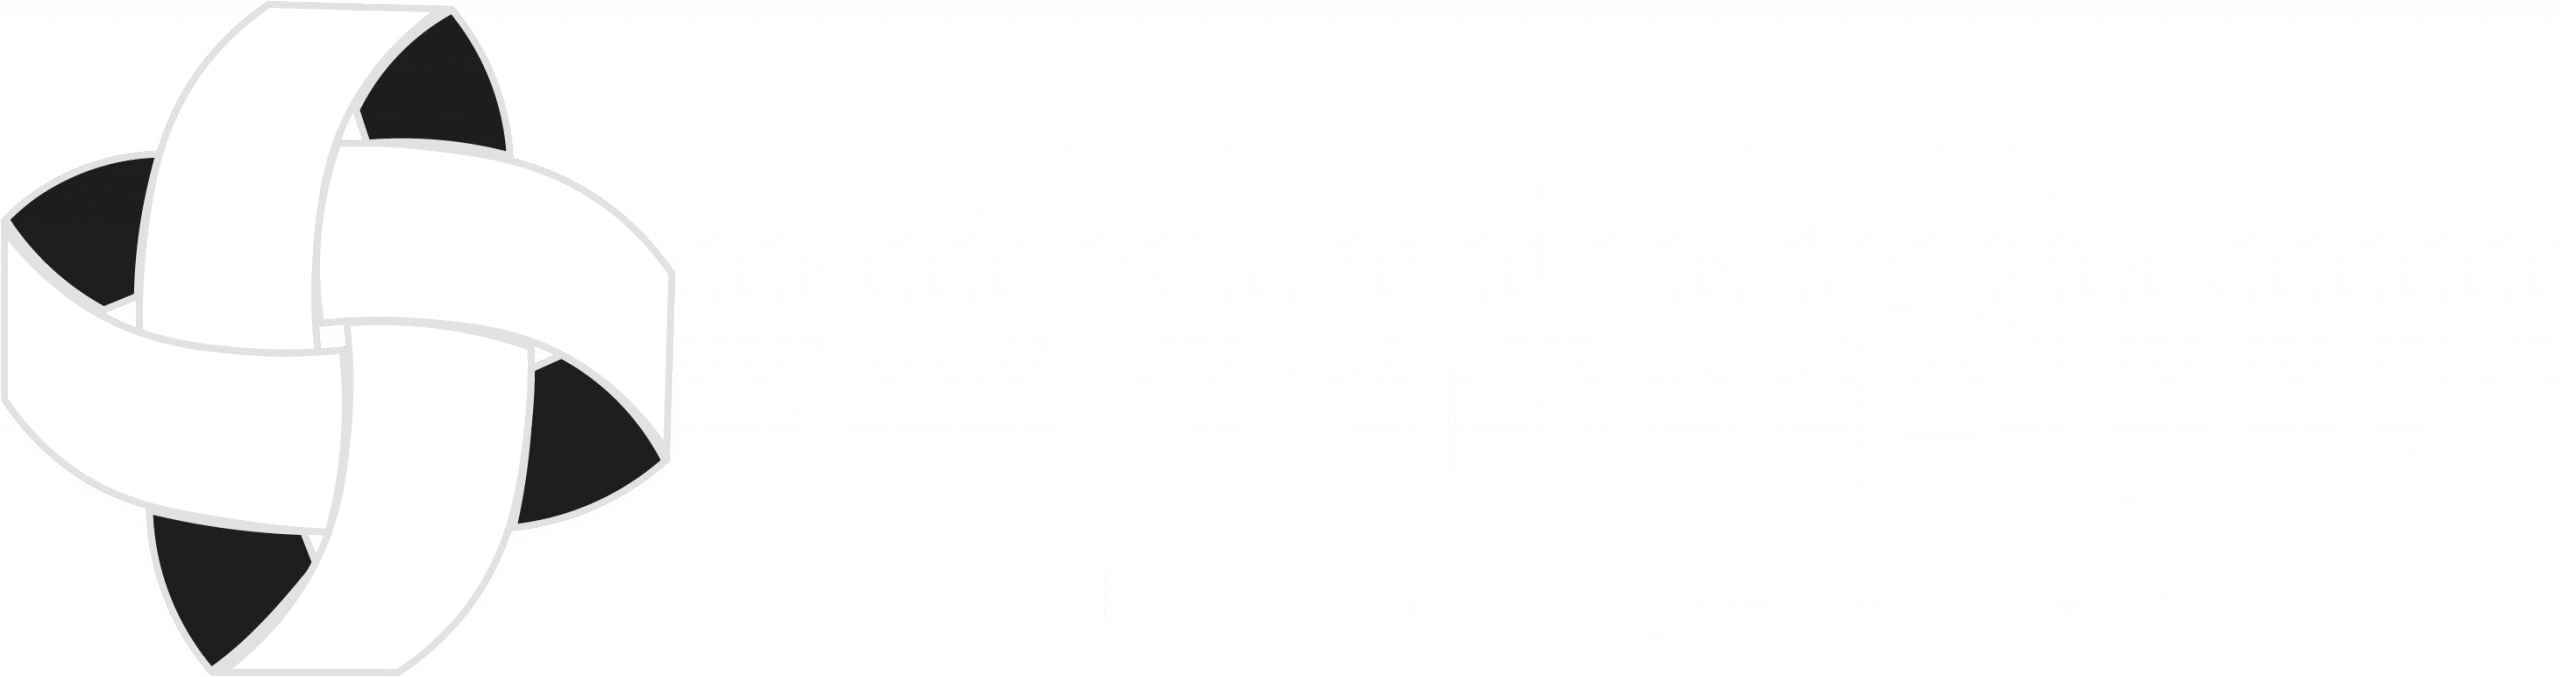 Platinum Creditplus Lending Corp.4 Ways Seafarers can be Financially Ready for the New Year